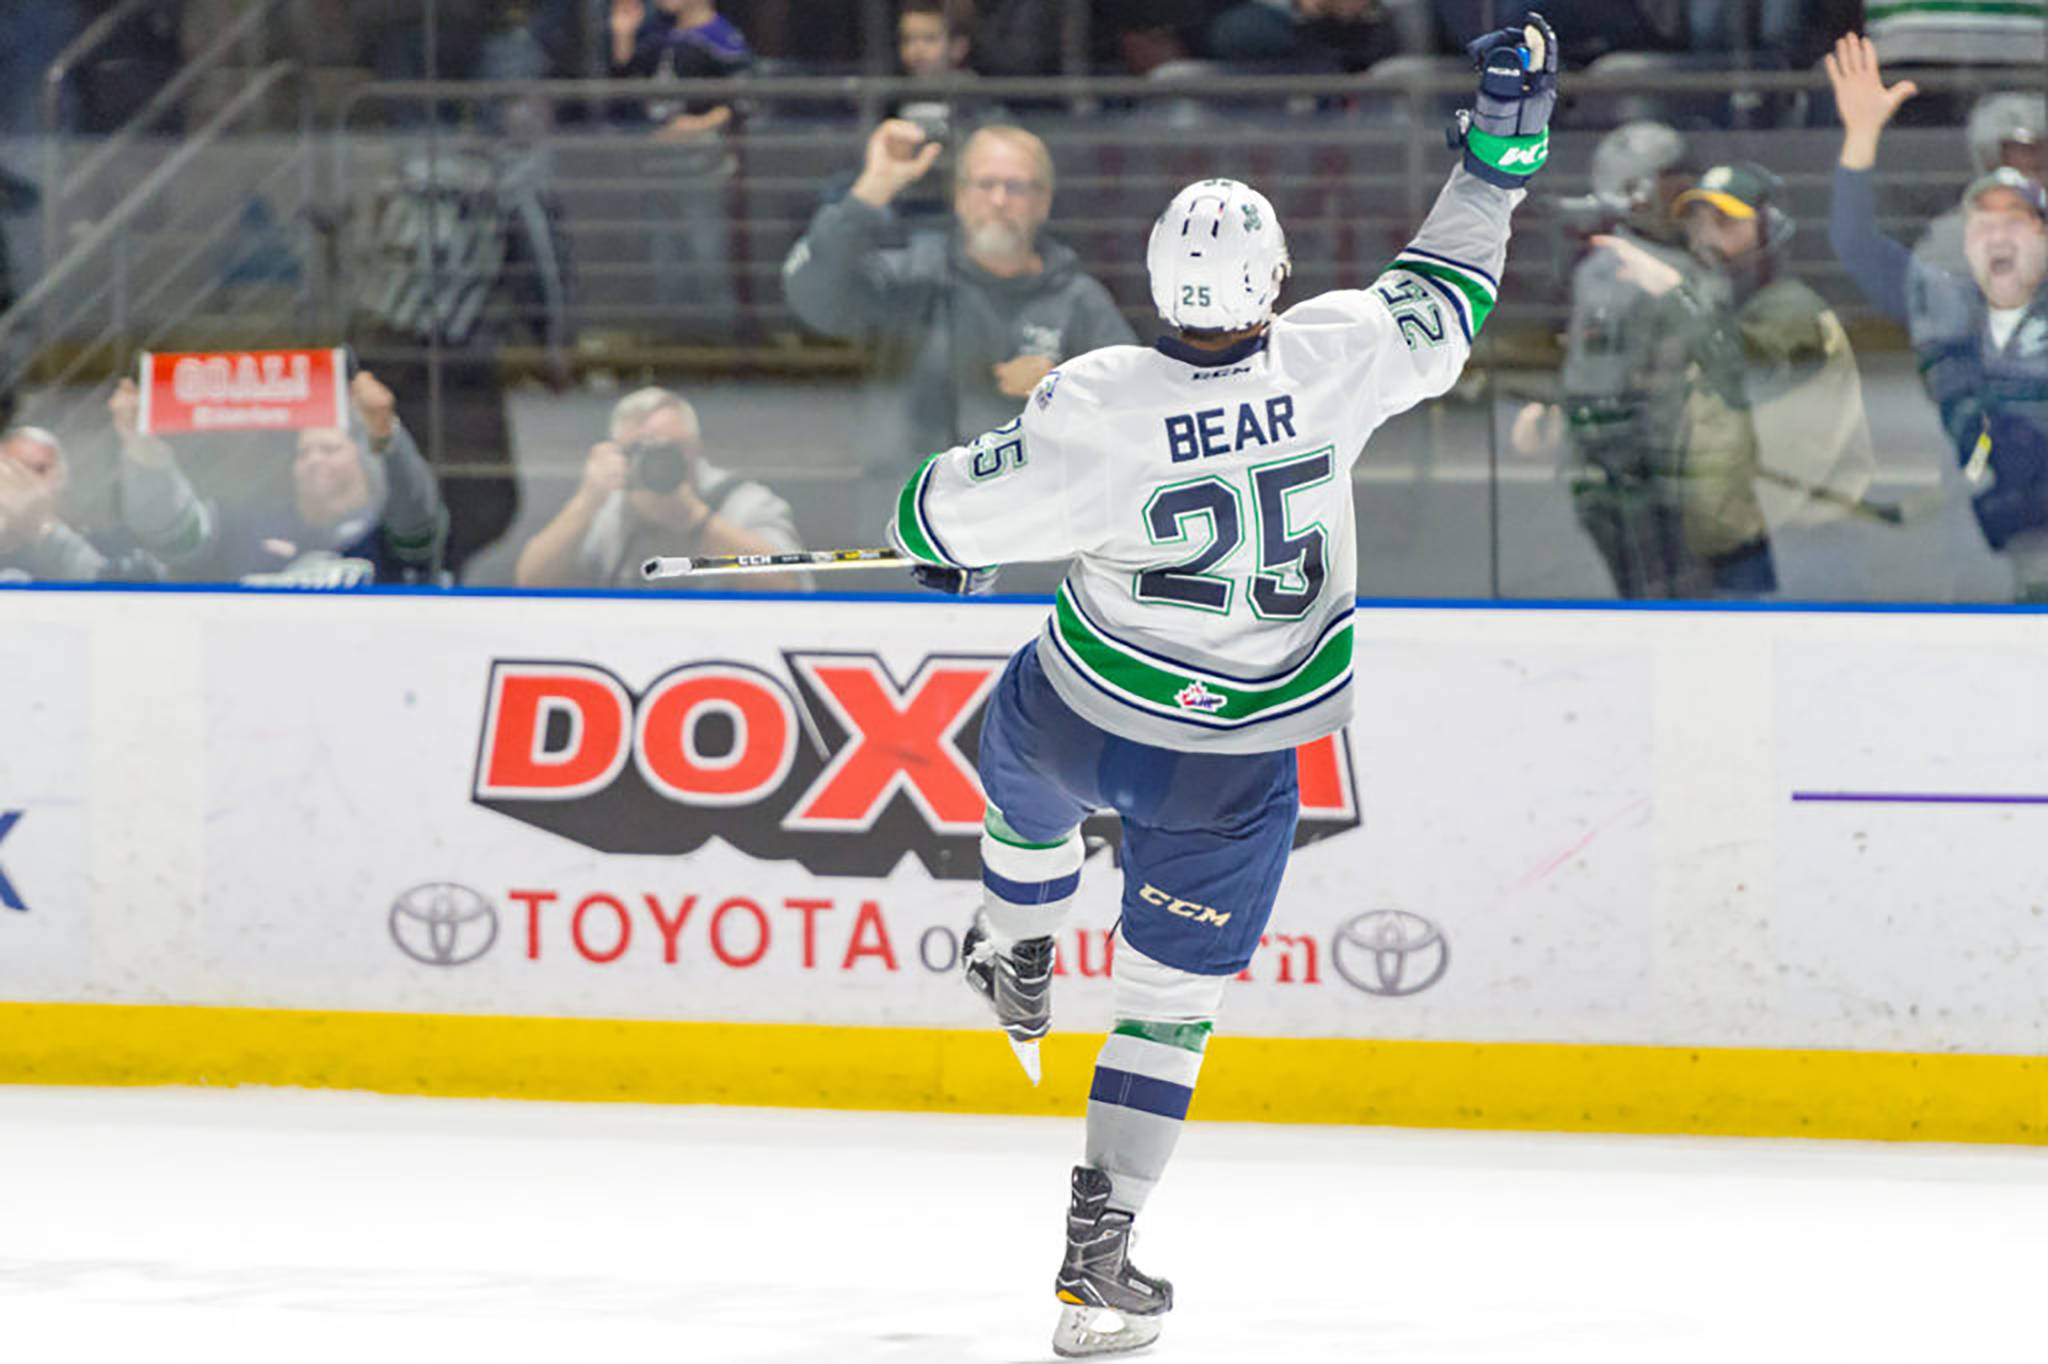 The Thunderbirds’ Ethan Bear celebrates his 27th goal of the season, a shot late in the game that lifted his team to a 3-2 win over the Silvertips on Friday night. COURTESY PHOTO, Brian Liesse/T-Birds